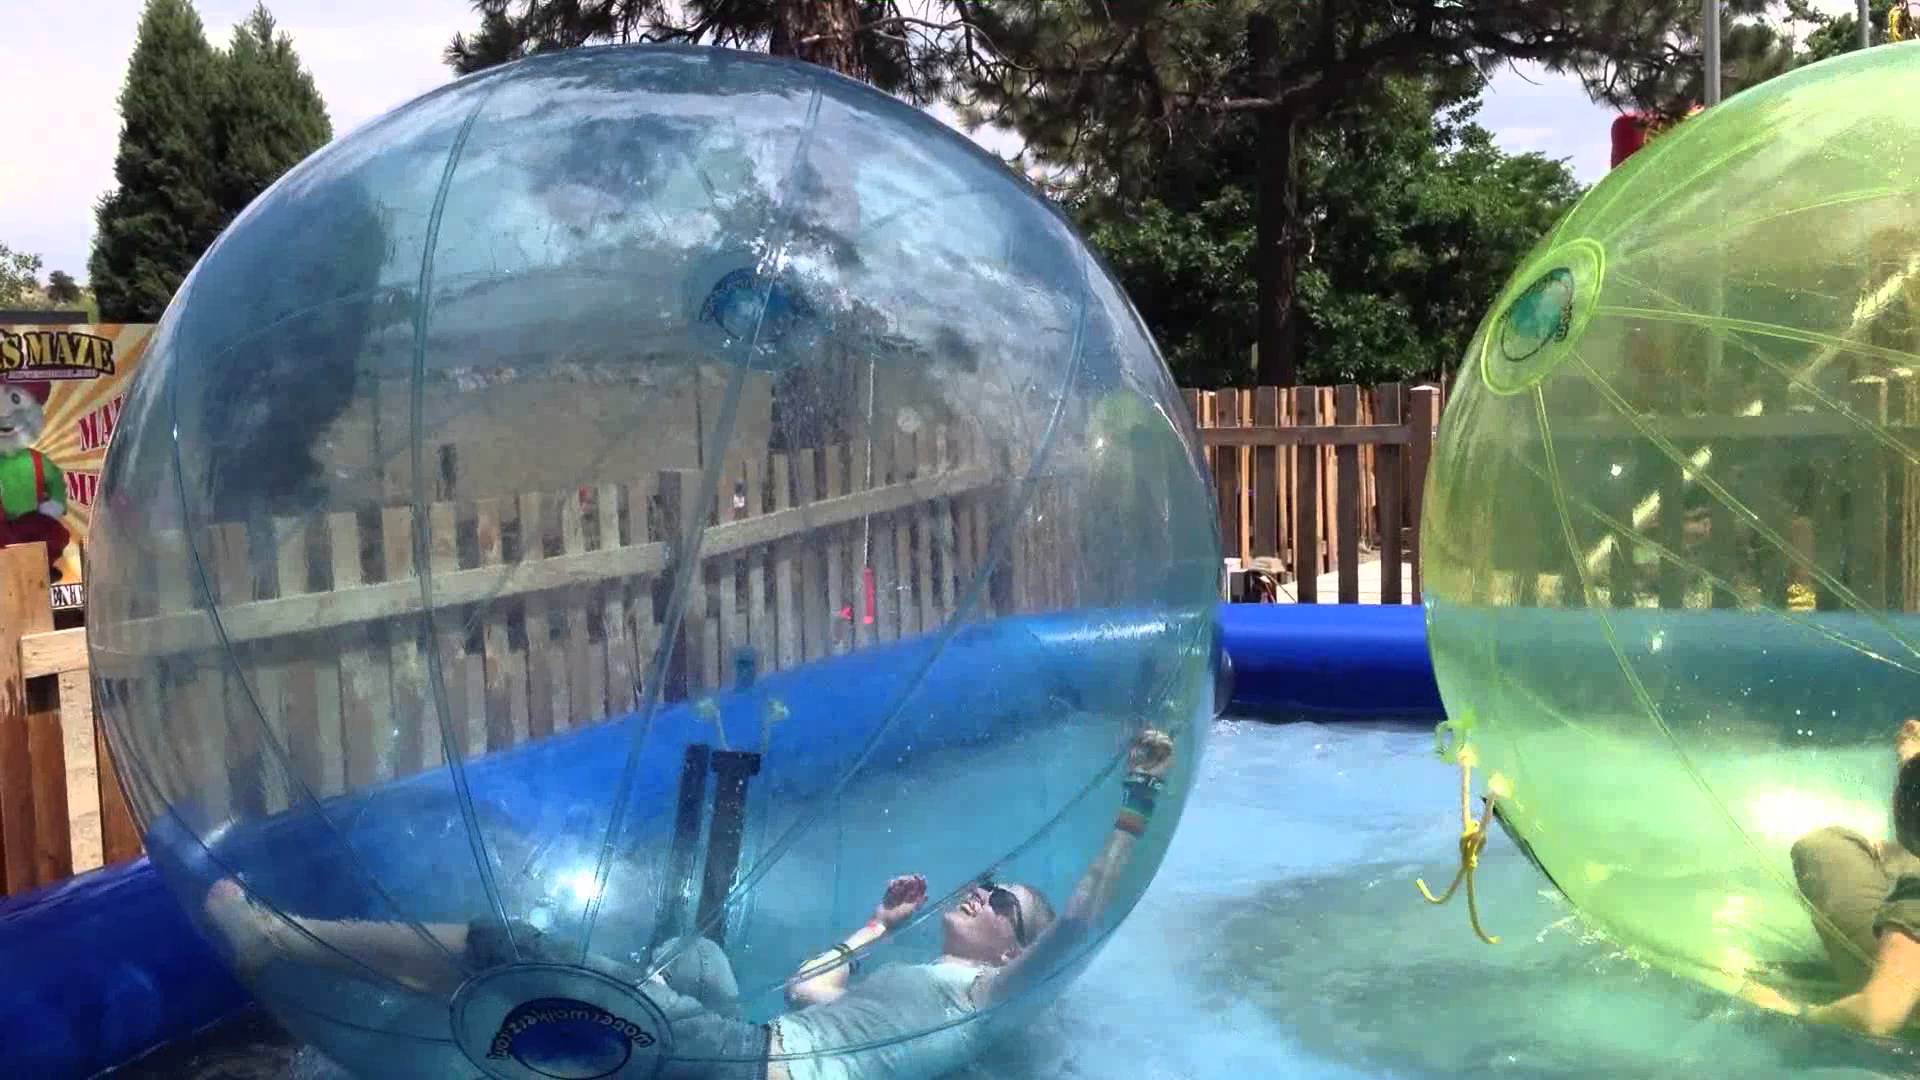 Giant Inflatable Hamster Balls...in a pool... - YouTube